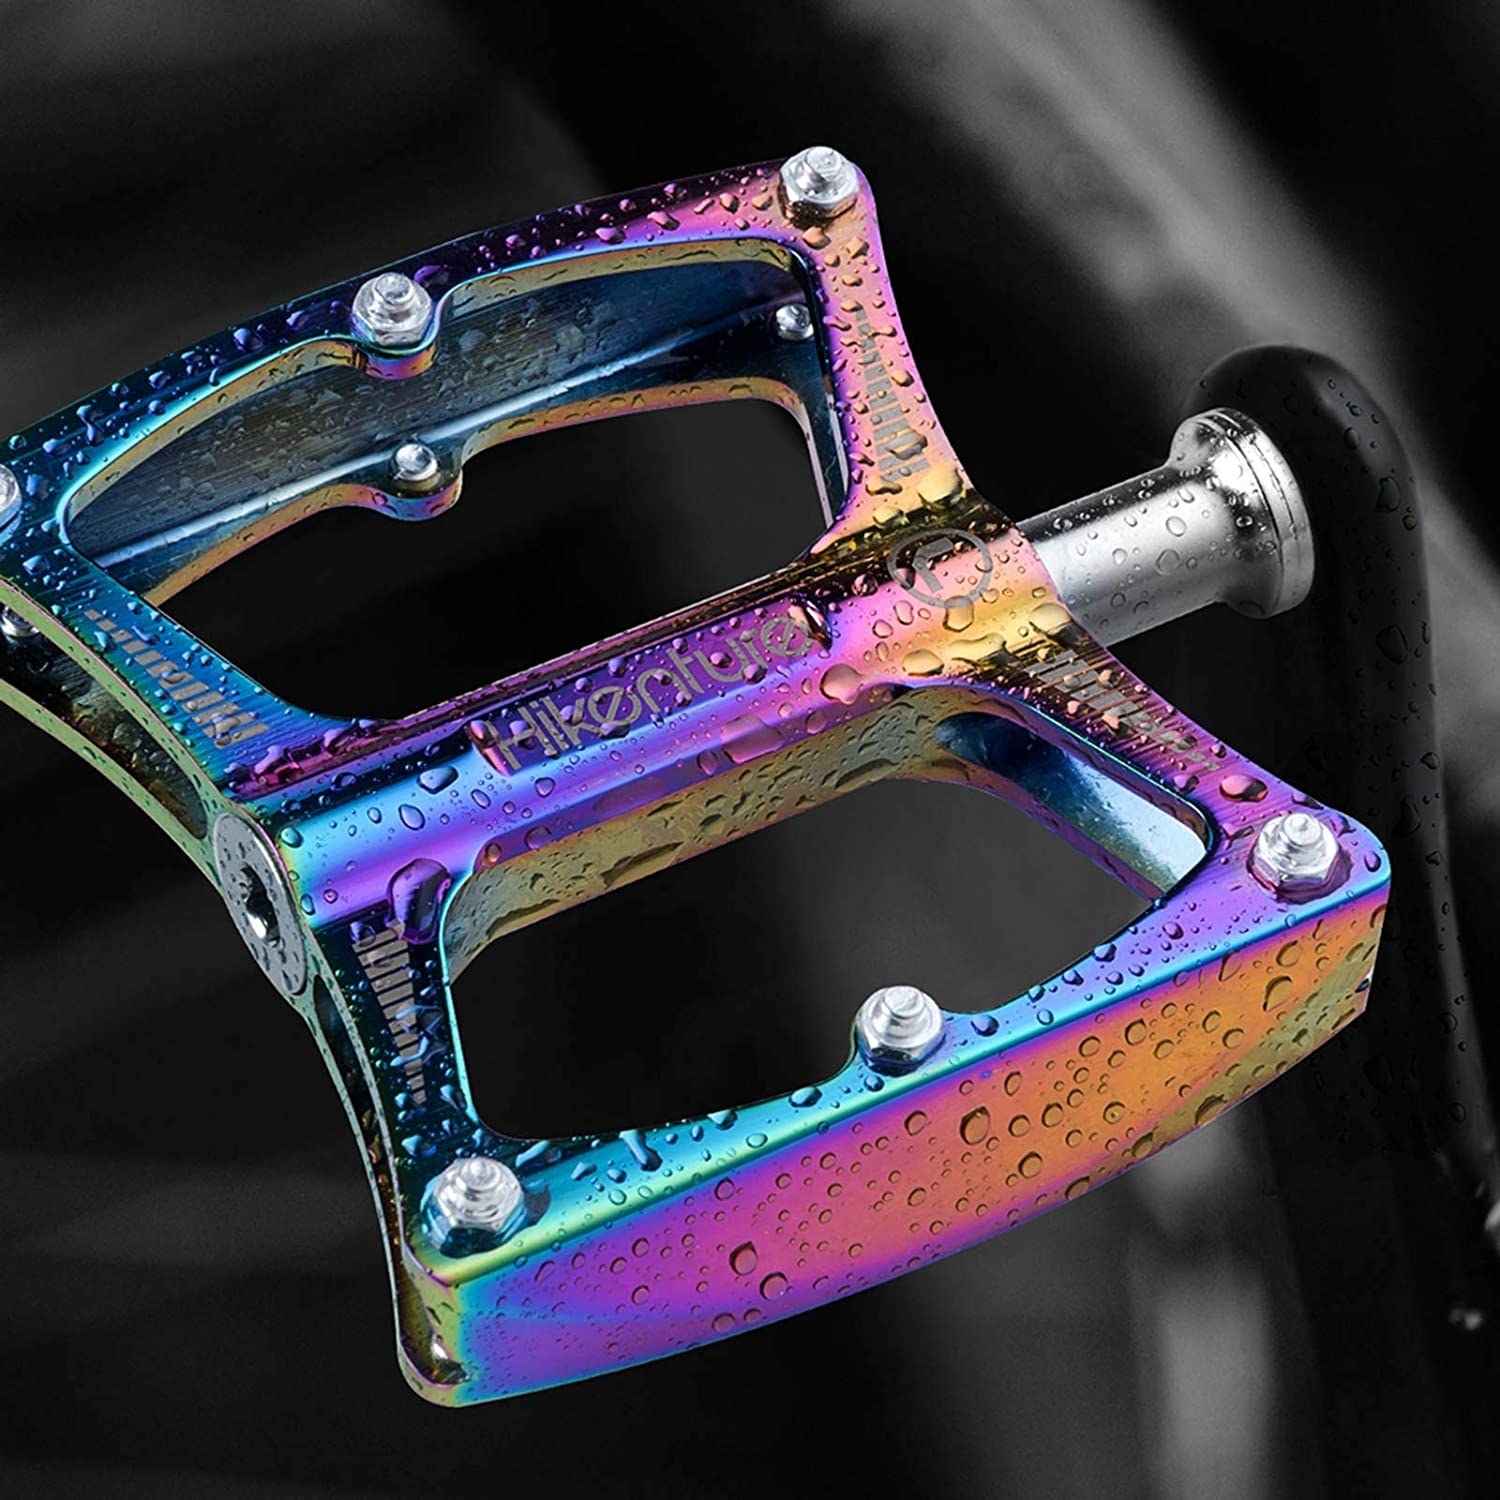 One of the metallic rainbow pedals up close 